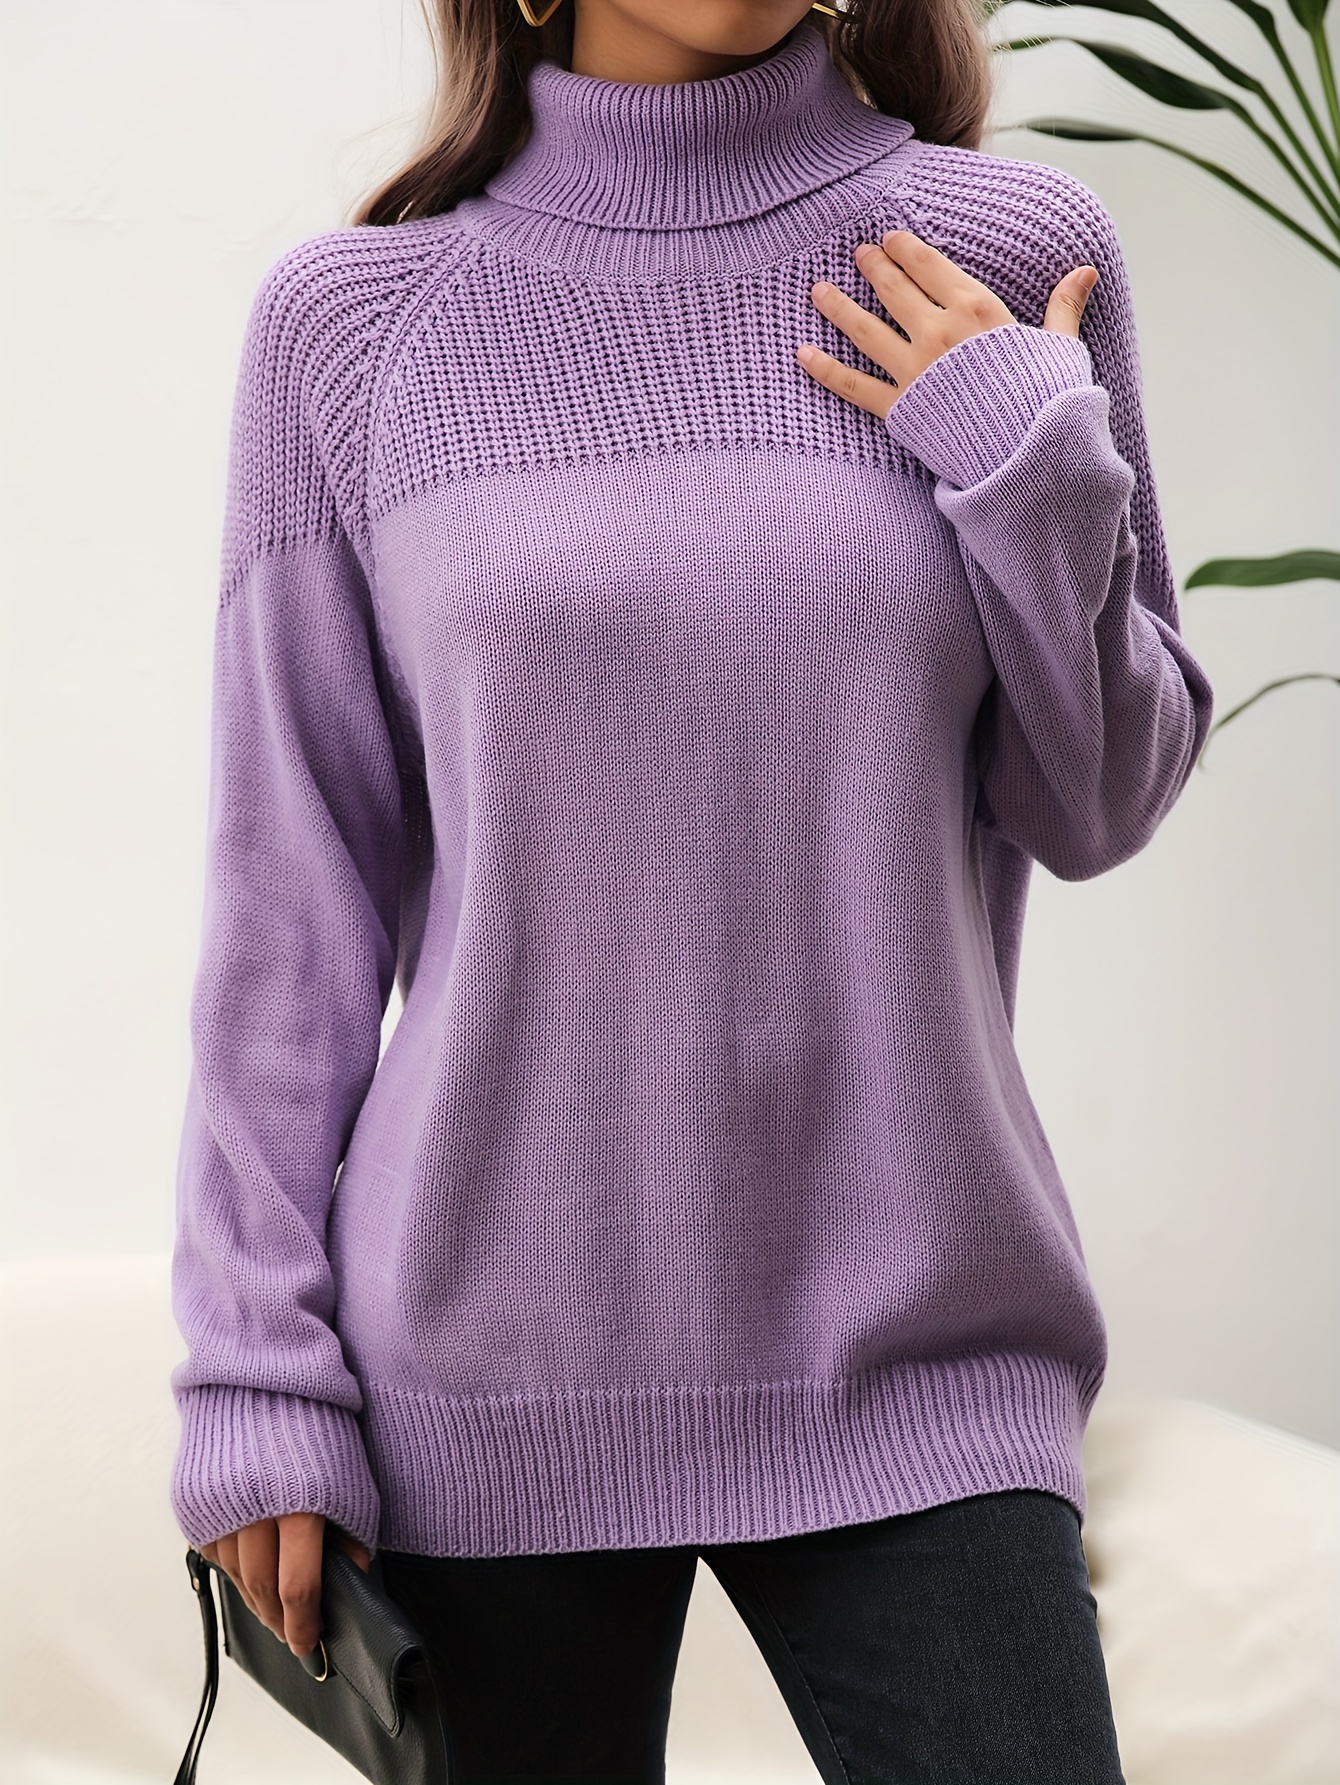 Sweaters For Teen Girls, Fall Clothes Tunic Women Sueteres Para Mujer  Largos Women's Autumn Winter Top Ins Style Casual Lantern Sleeve Knitted  Sweater